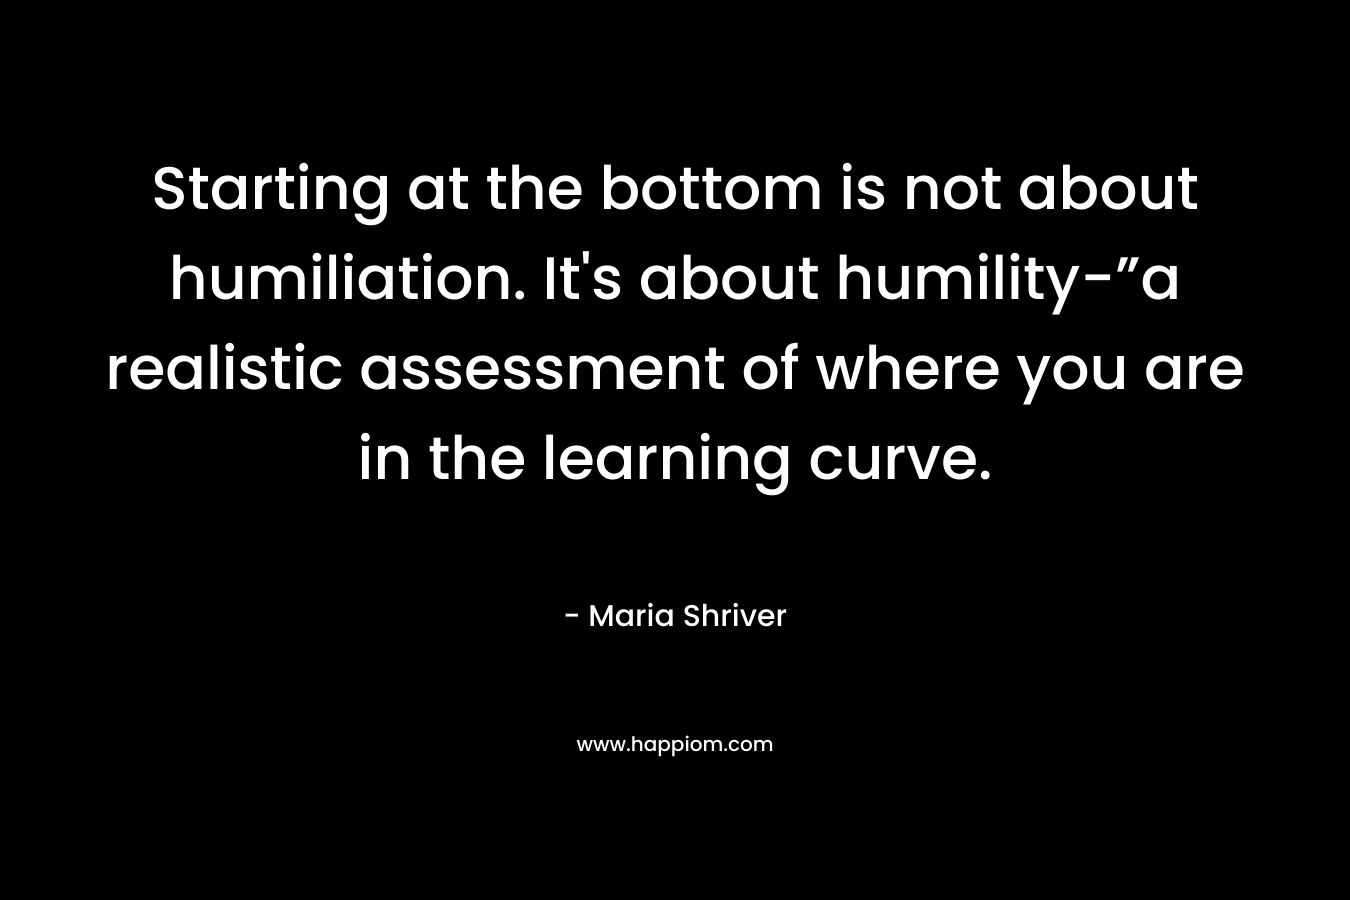 Starting at the bottom is not about humiliation. It's about humility-”a realistic assessment of where you are in the learning curve.